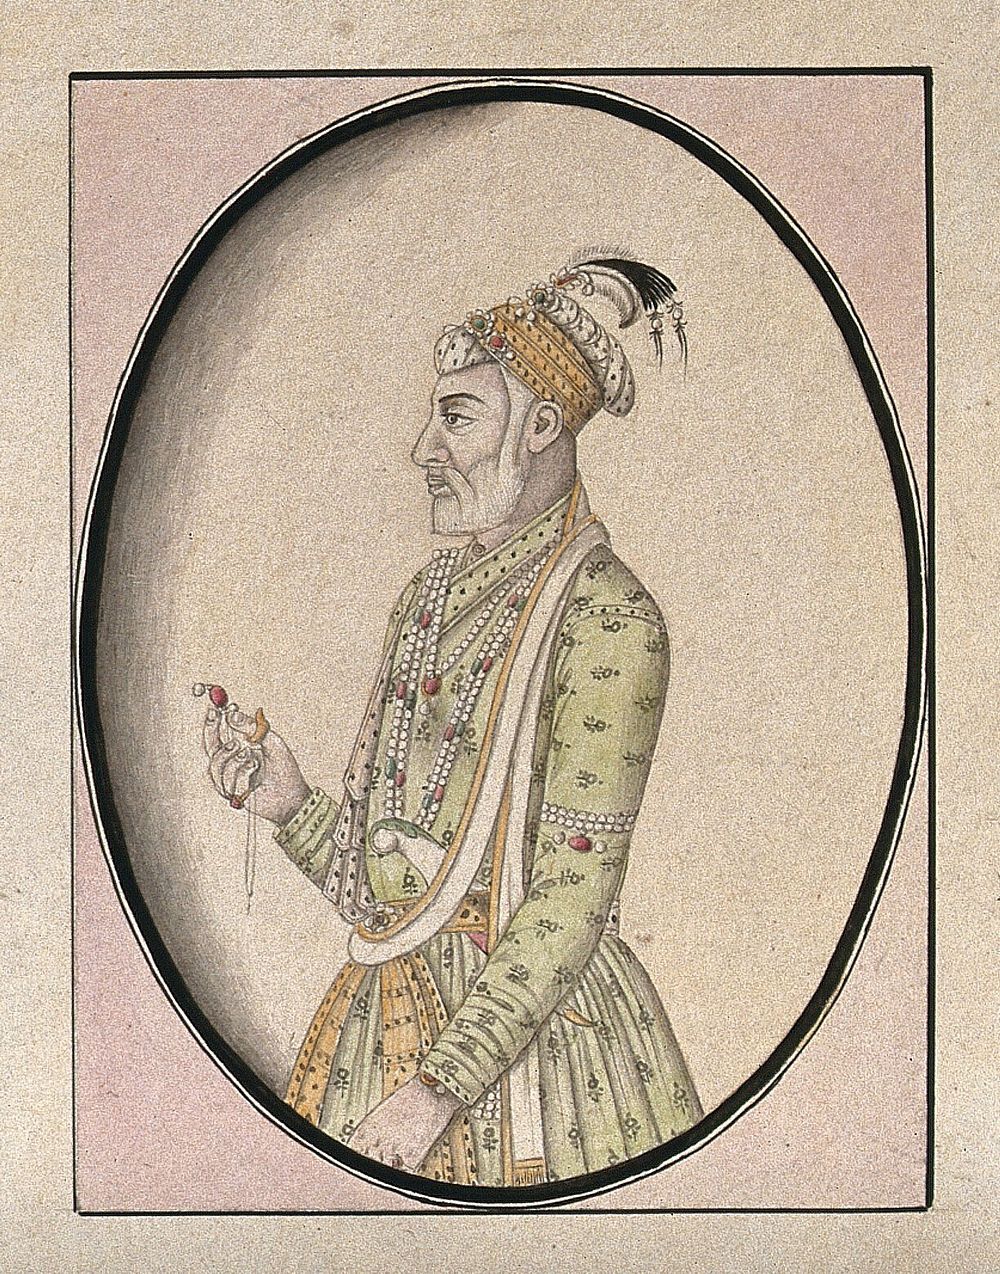 A member of the Mughal royal family . Watercolour drawing by an Indian artist.